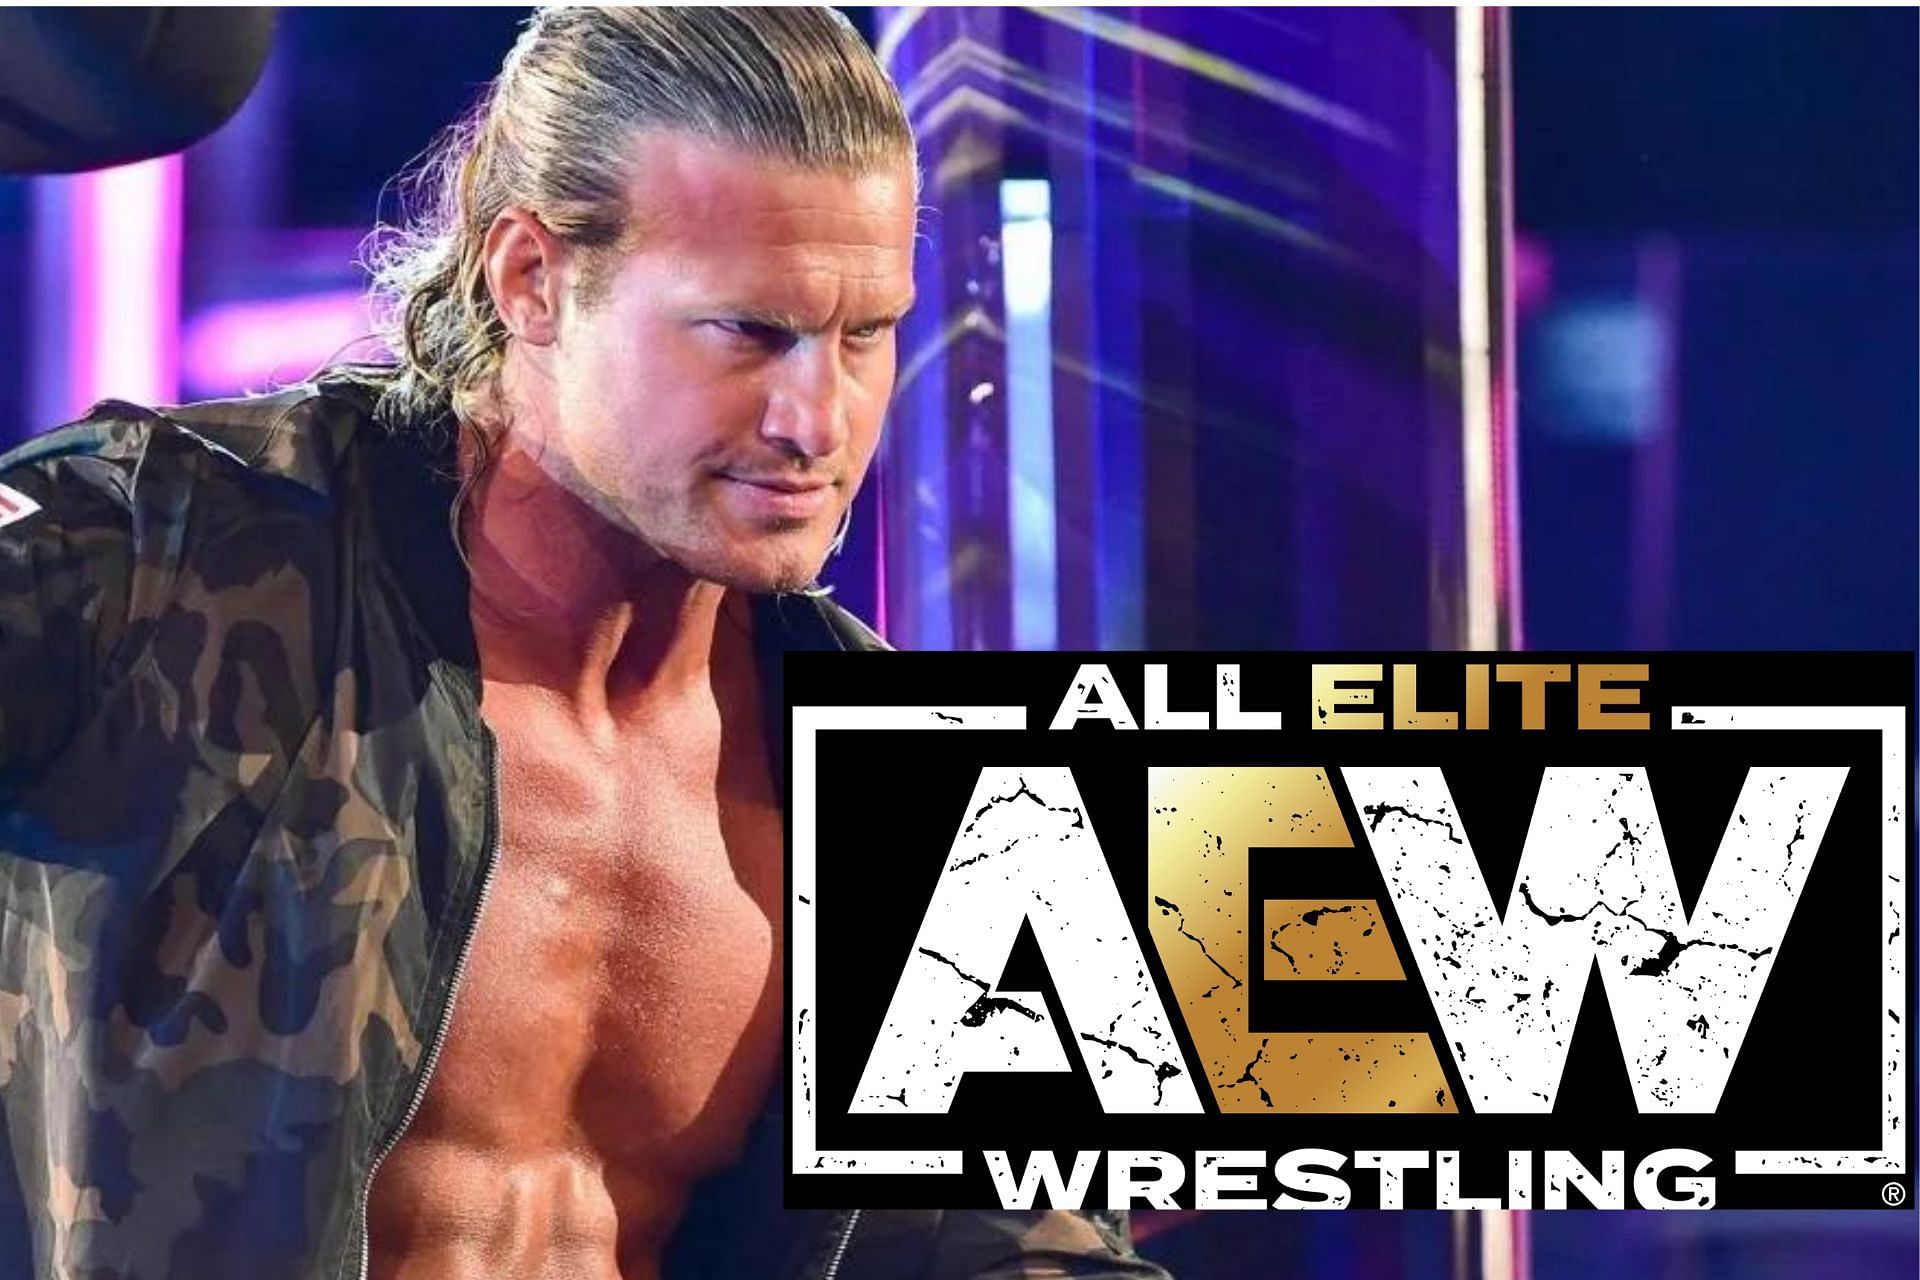 Dolph Ziggler was released from WWE recently.